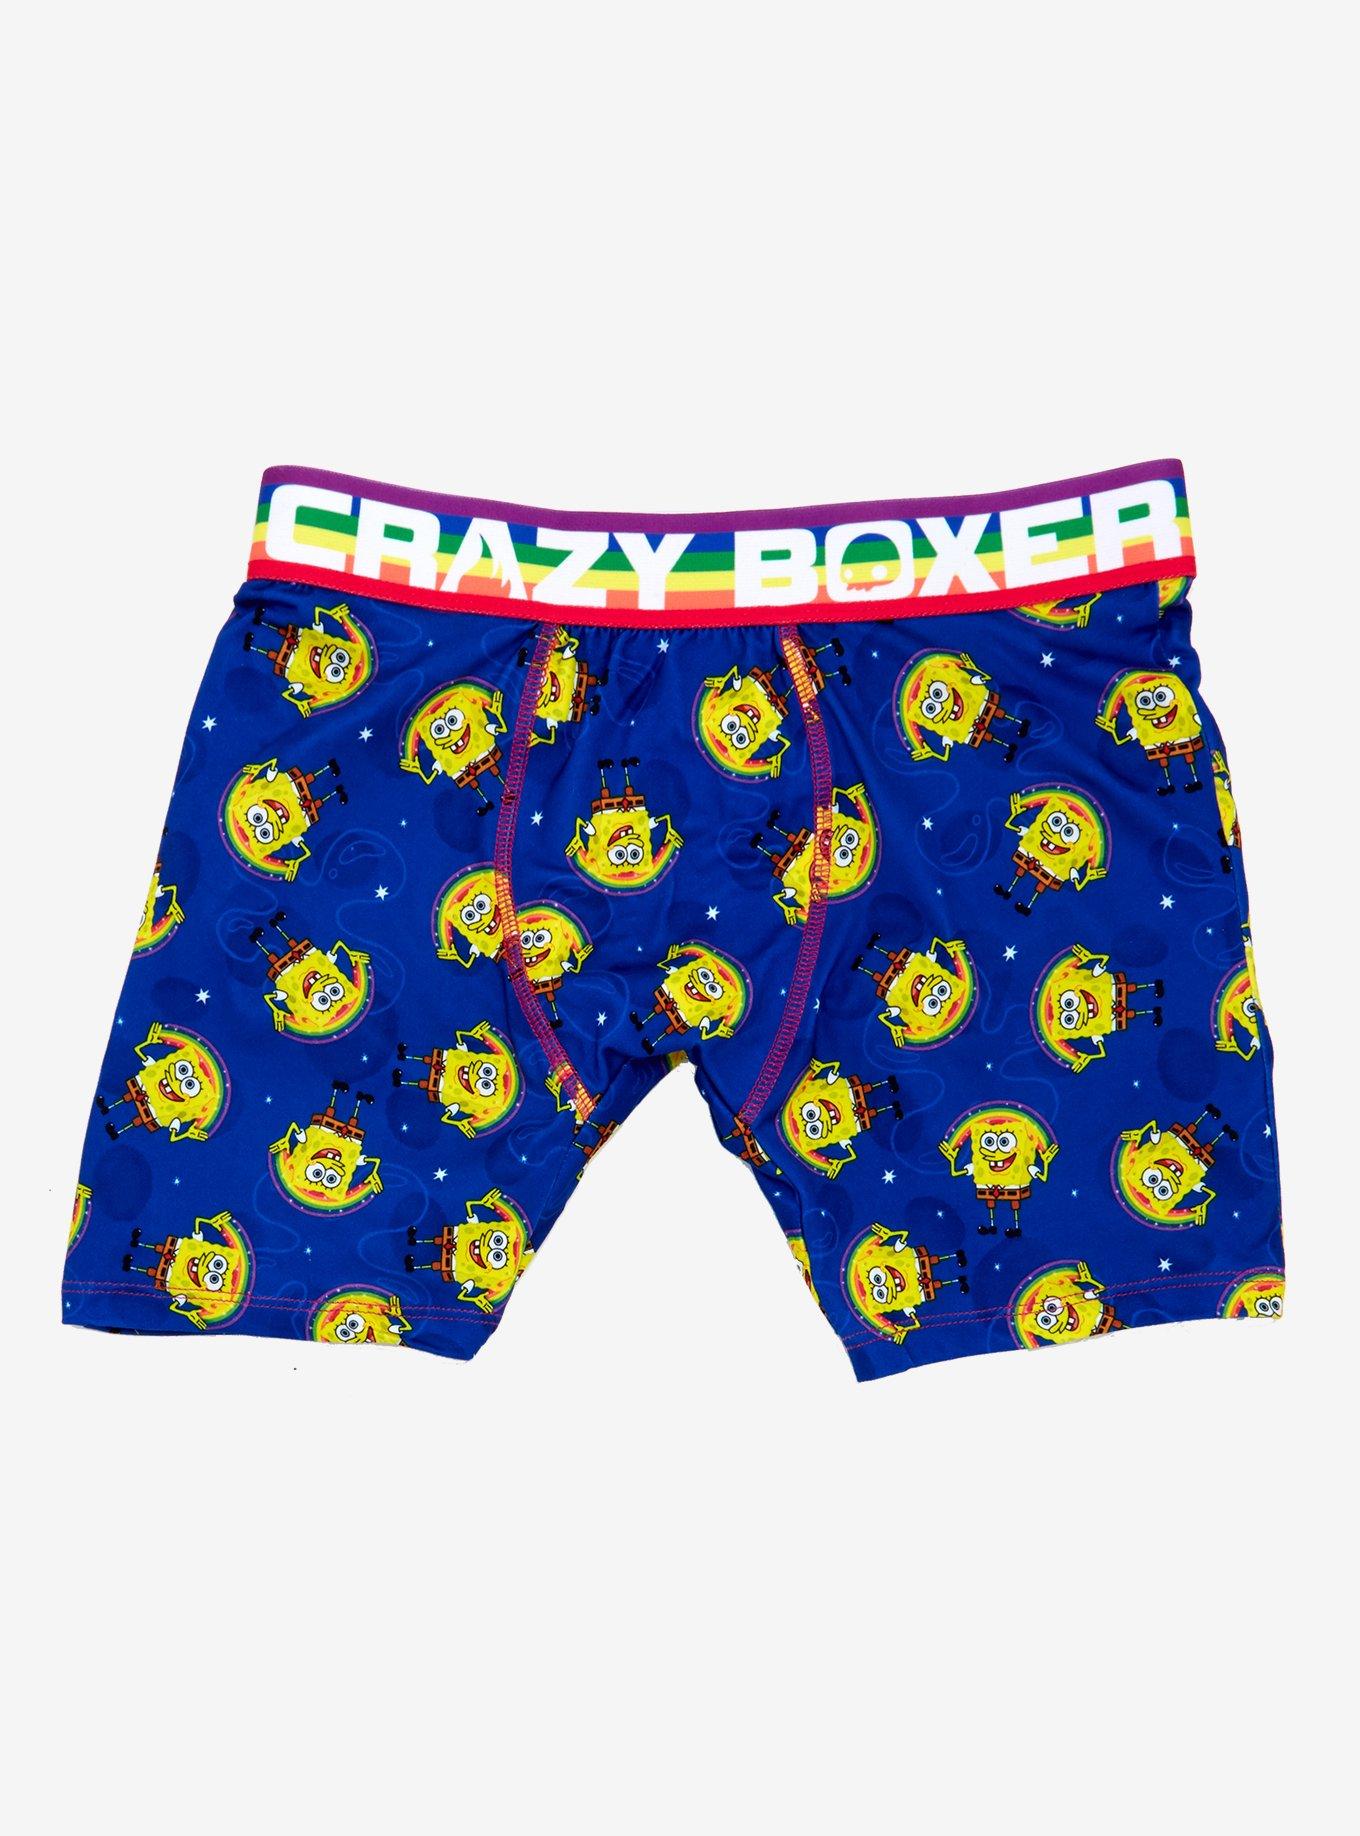 Nikelodeon Paw Patrol Boy 6 PC Boxer Briefs Underwear Size 6, Multicolor, 6  : : Clothing, Shoes & Accessories